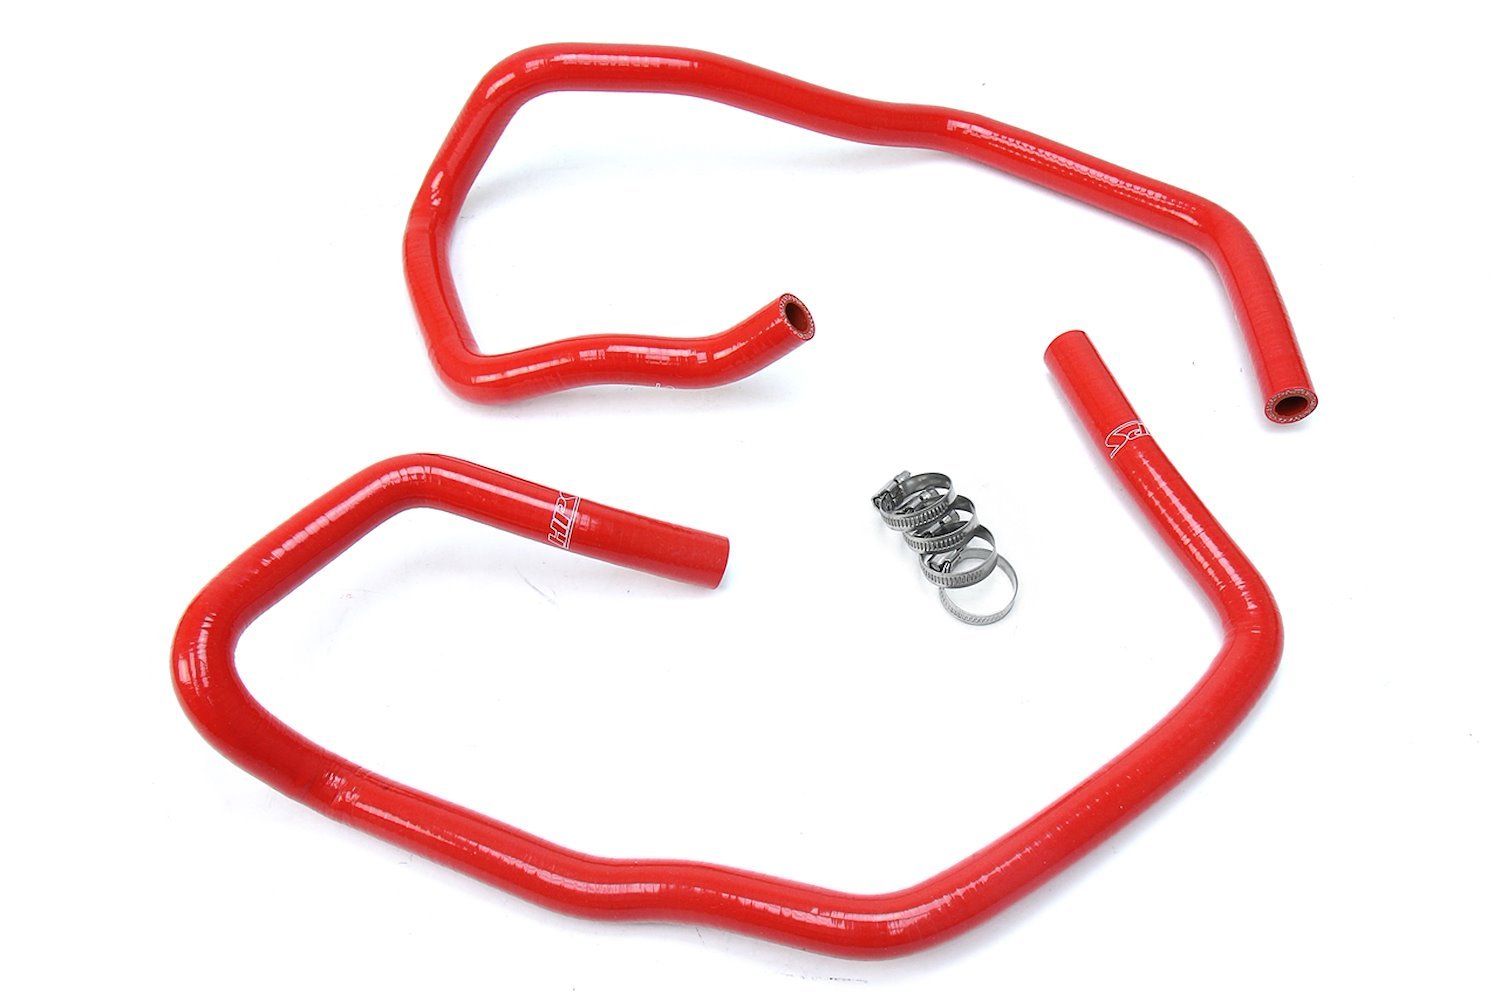 57-1694-RED Heater Hose Kit, High-Temp 3-Ply Reinforced Silicone, Replace OEM Rubber Heater Coolant Hoses